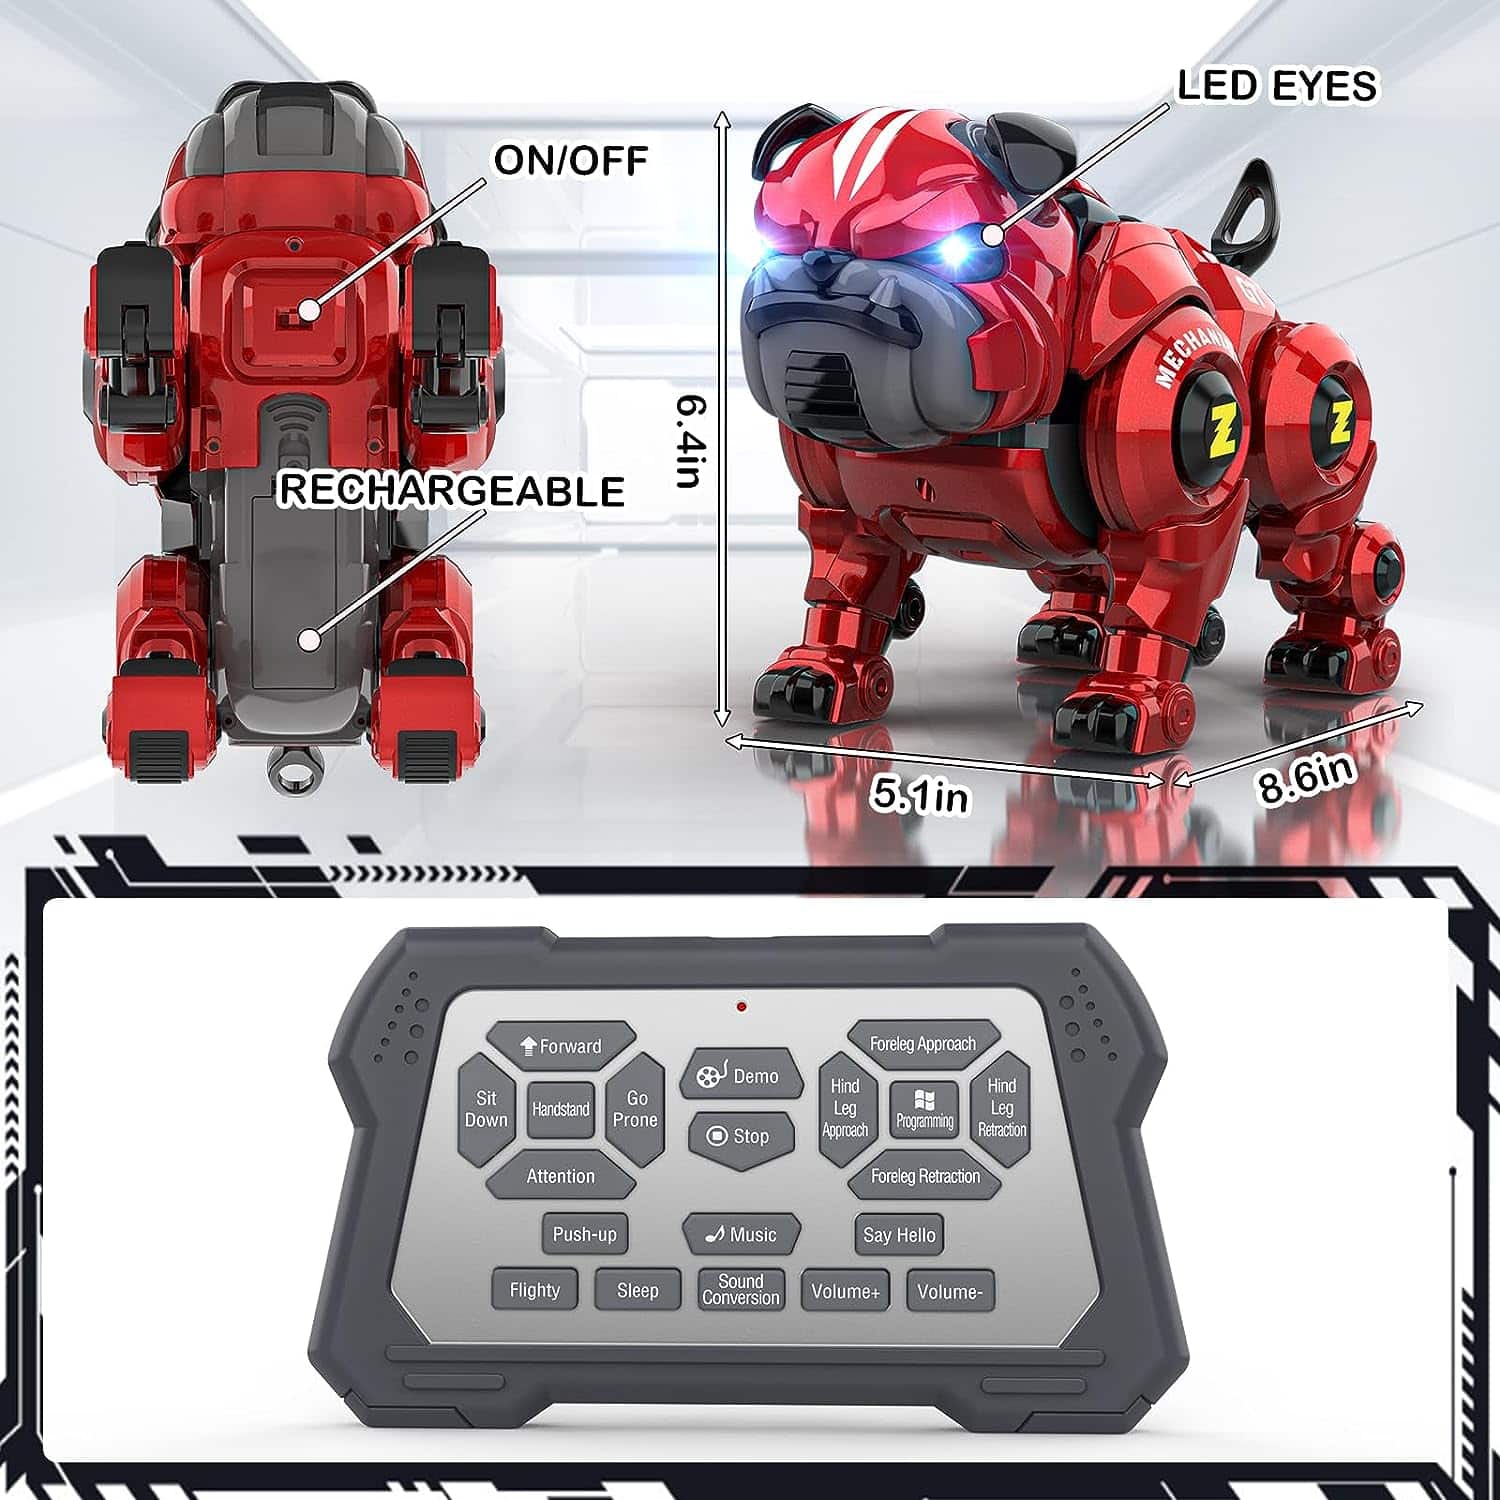 Lterfear Robot Dog Toys for Boys Review: The Perfect Companion for Fun and Learning